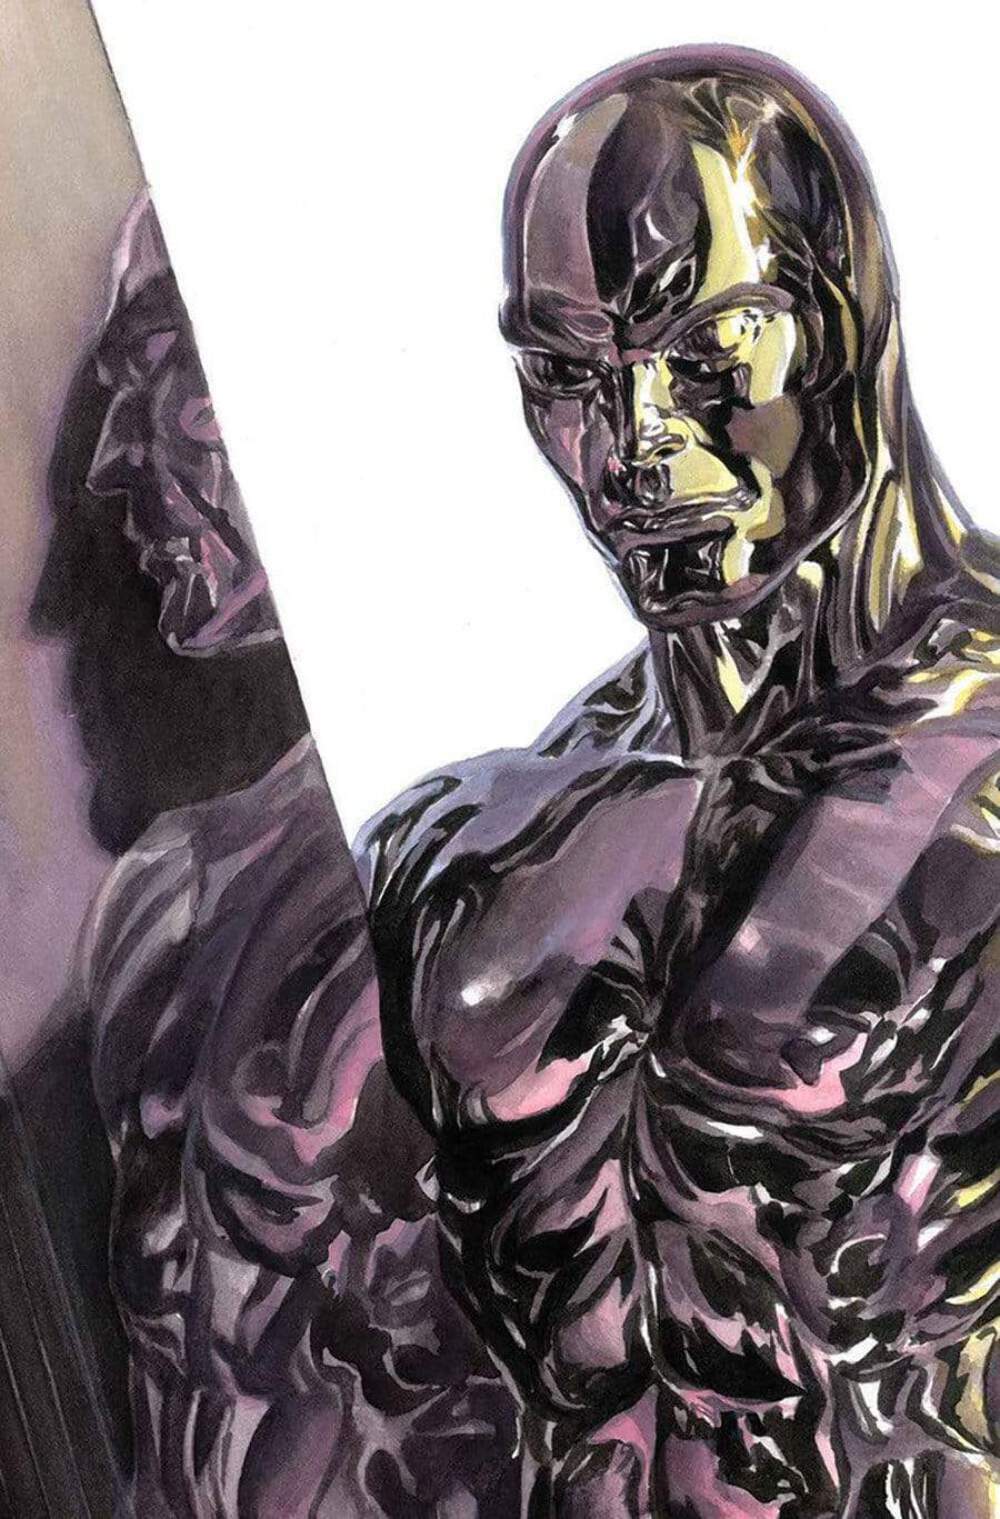 FANTASTIC FOUR ANTITHESIS #2 (OF 4) ALEX ROSS SILVER SURFER TIMELESS VARIANT 09/23/20